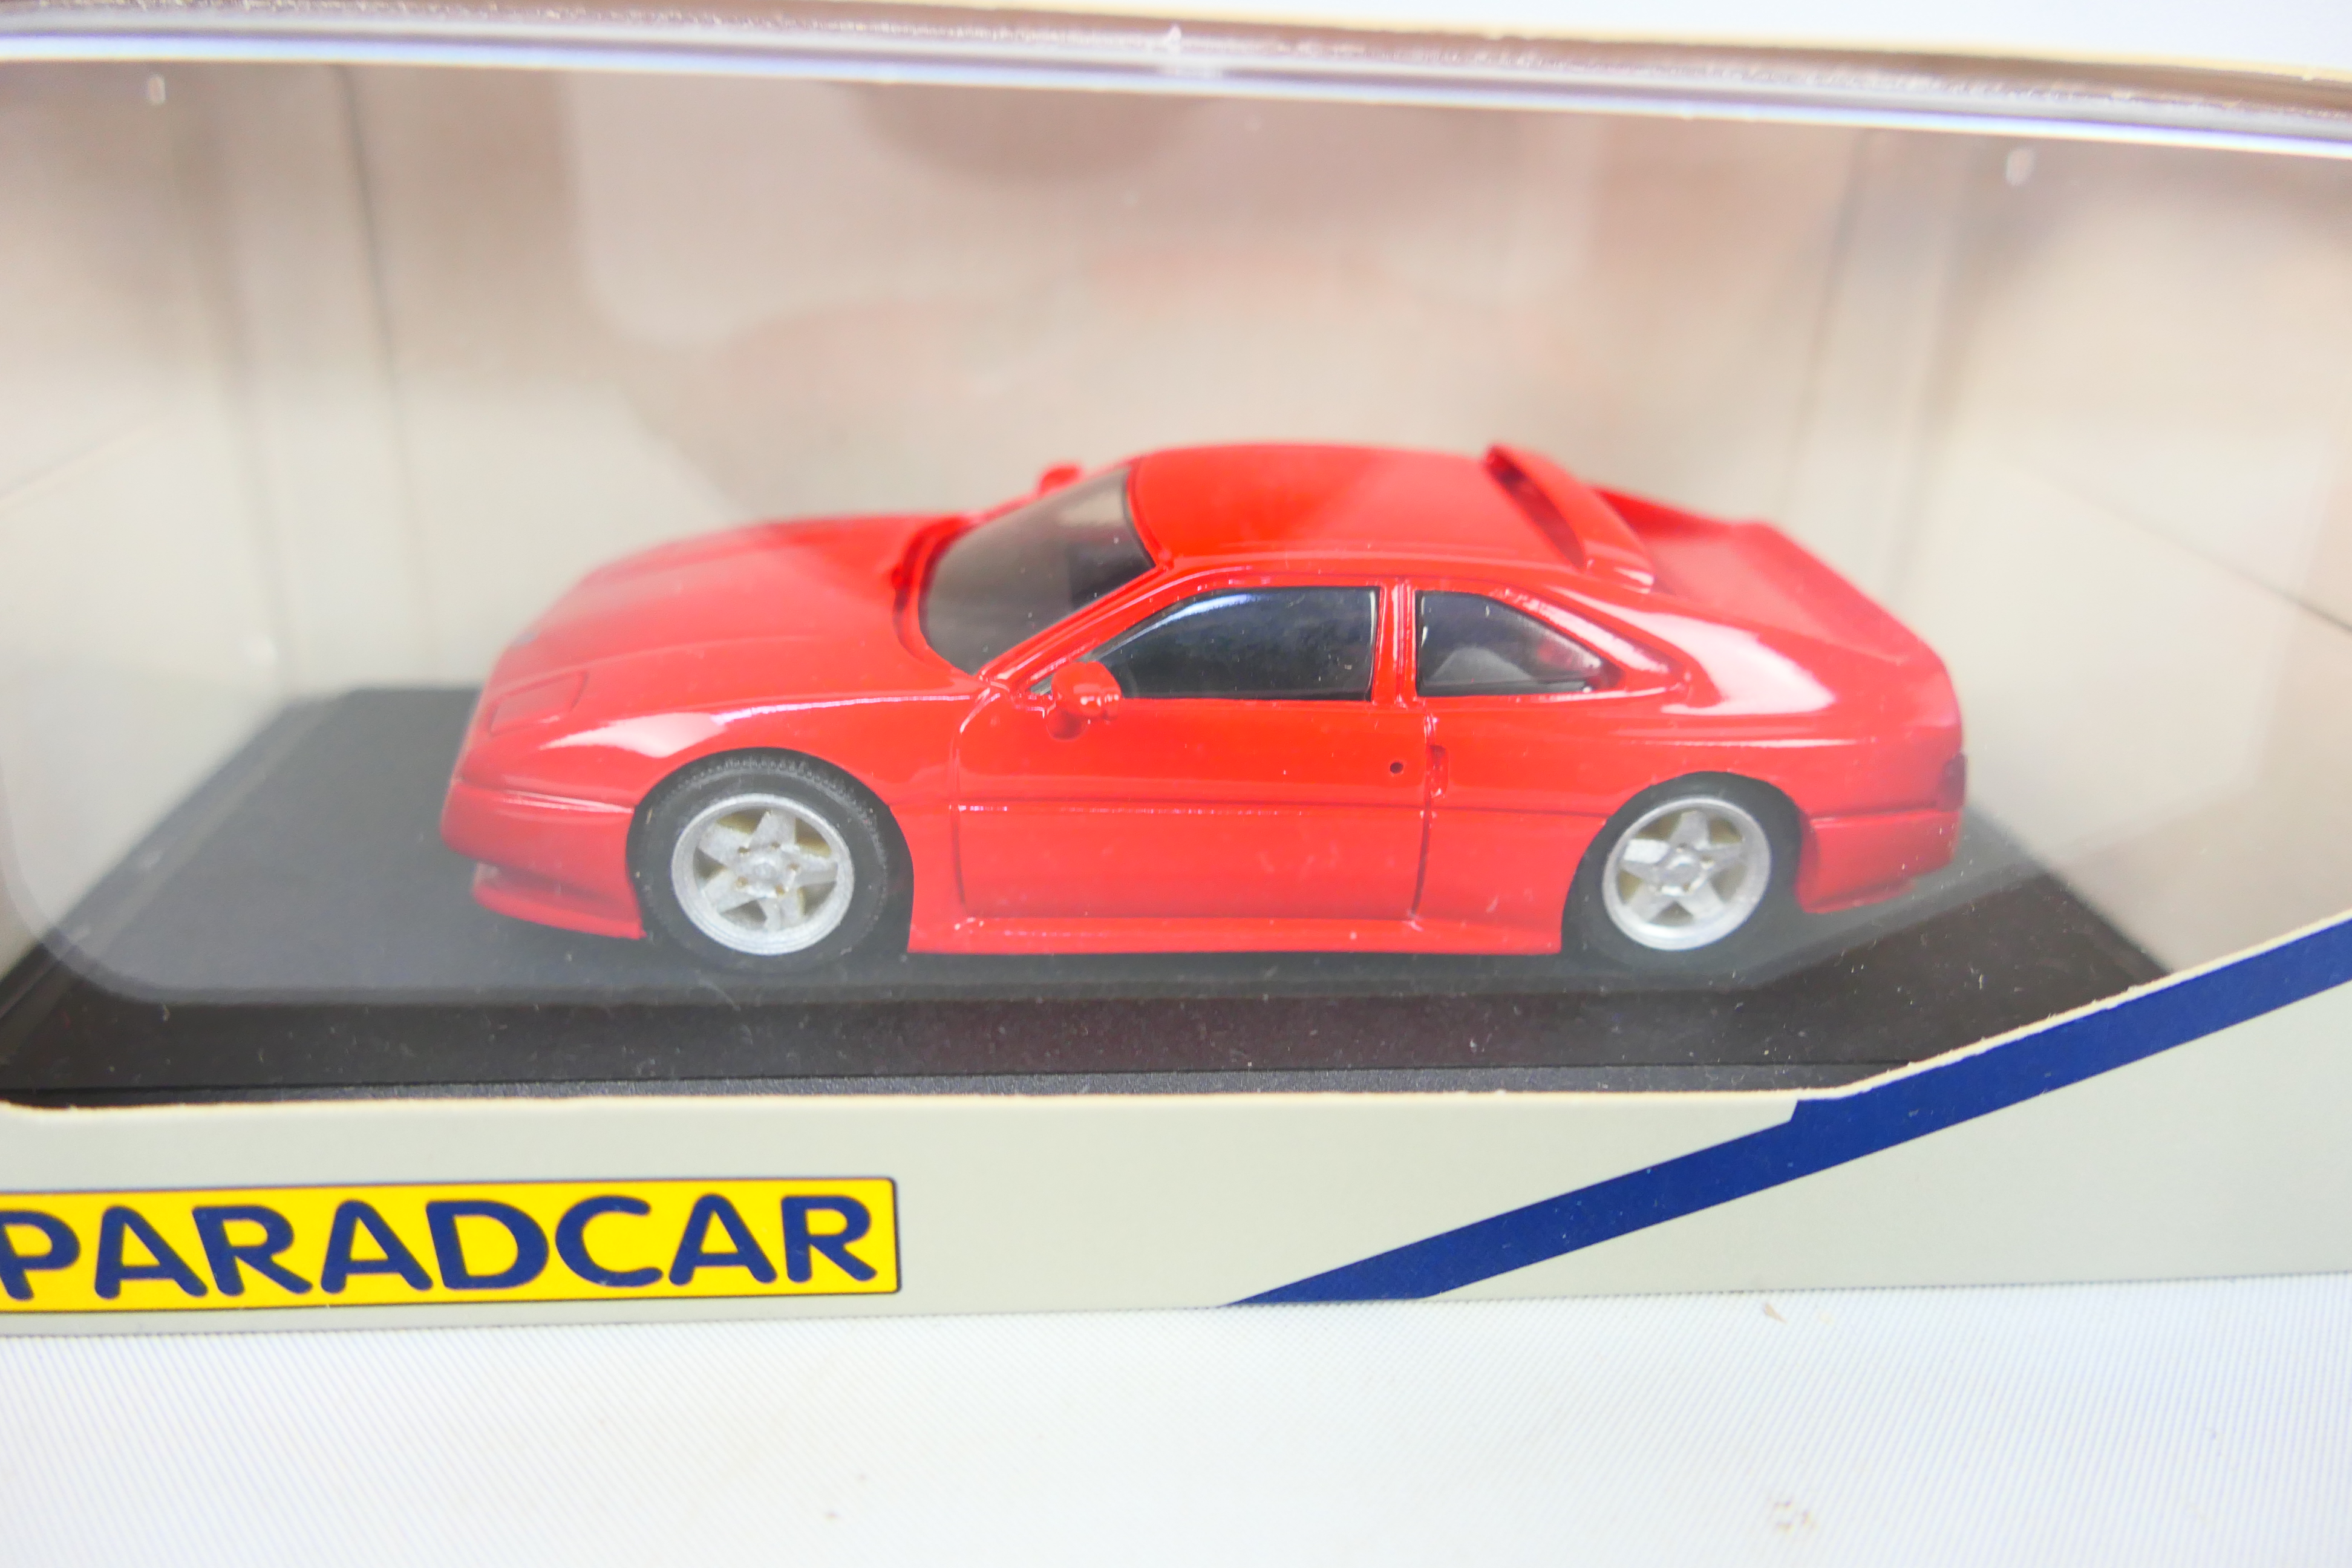 Paradcar - 2 x rare French Venturi models in 1:43 scale resin, - Image 4 of 10